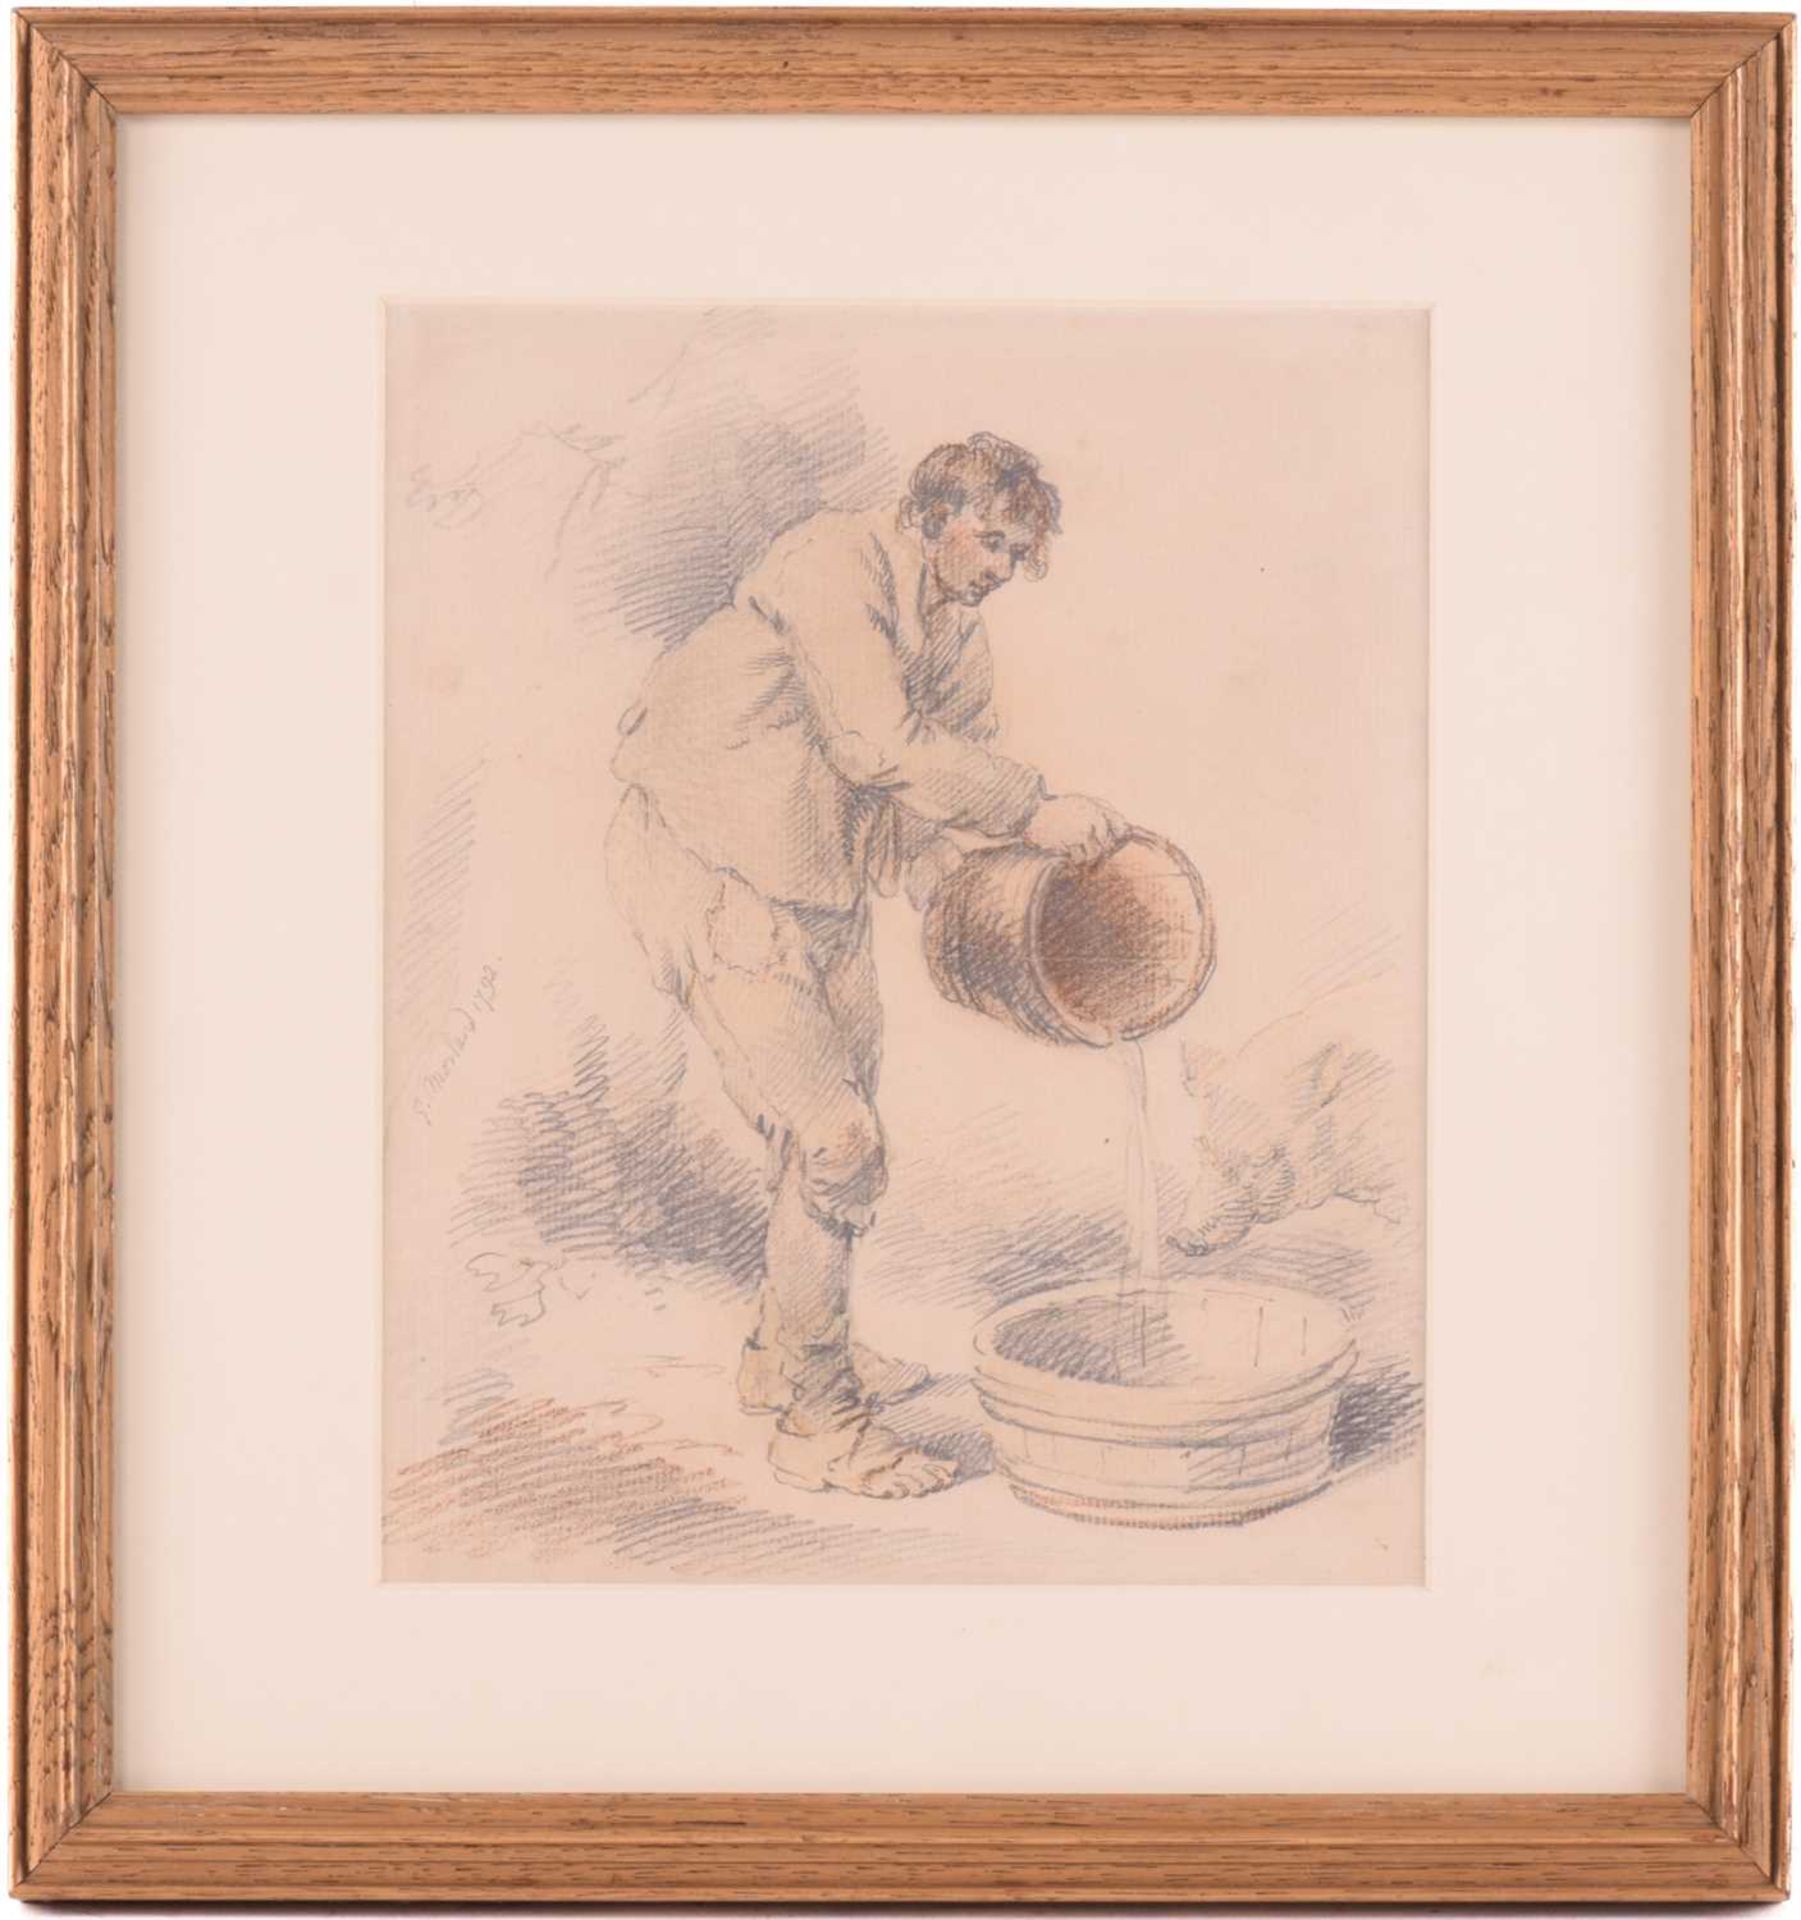 George Charles Morland (1762-1804), 'Filling the Trough', signed and dated ‘G.Morland 1792’, - Image 2 of 5